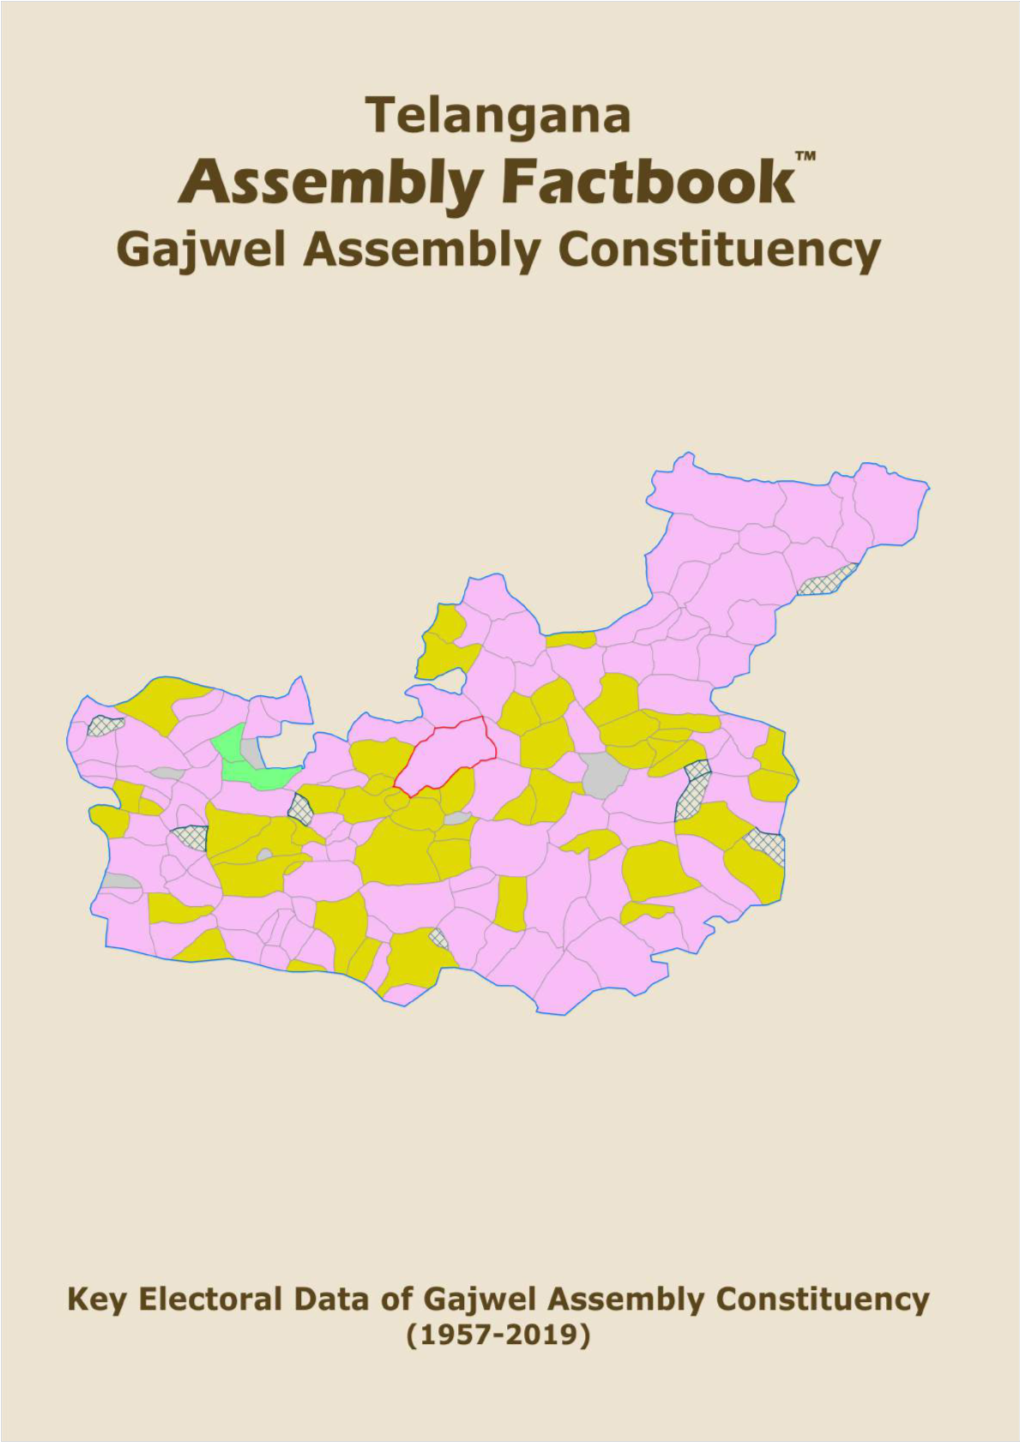 Key Electoral Data of Gajwel Assembly Constituency